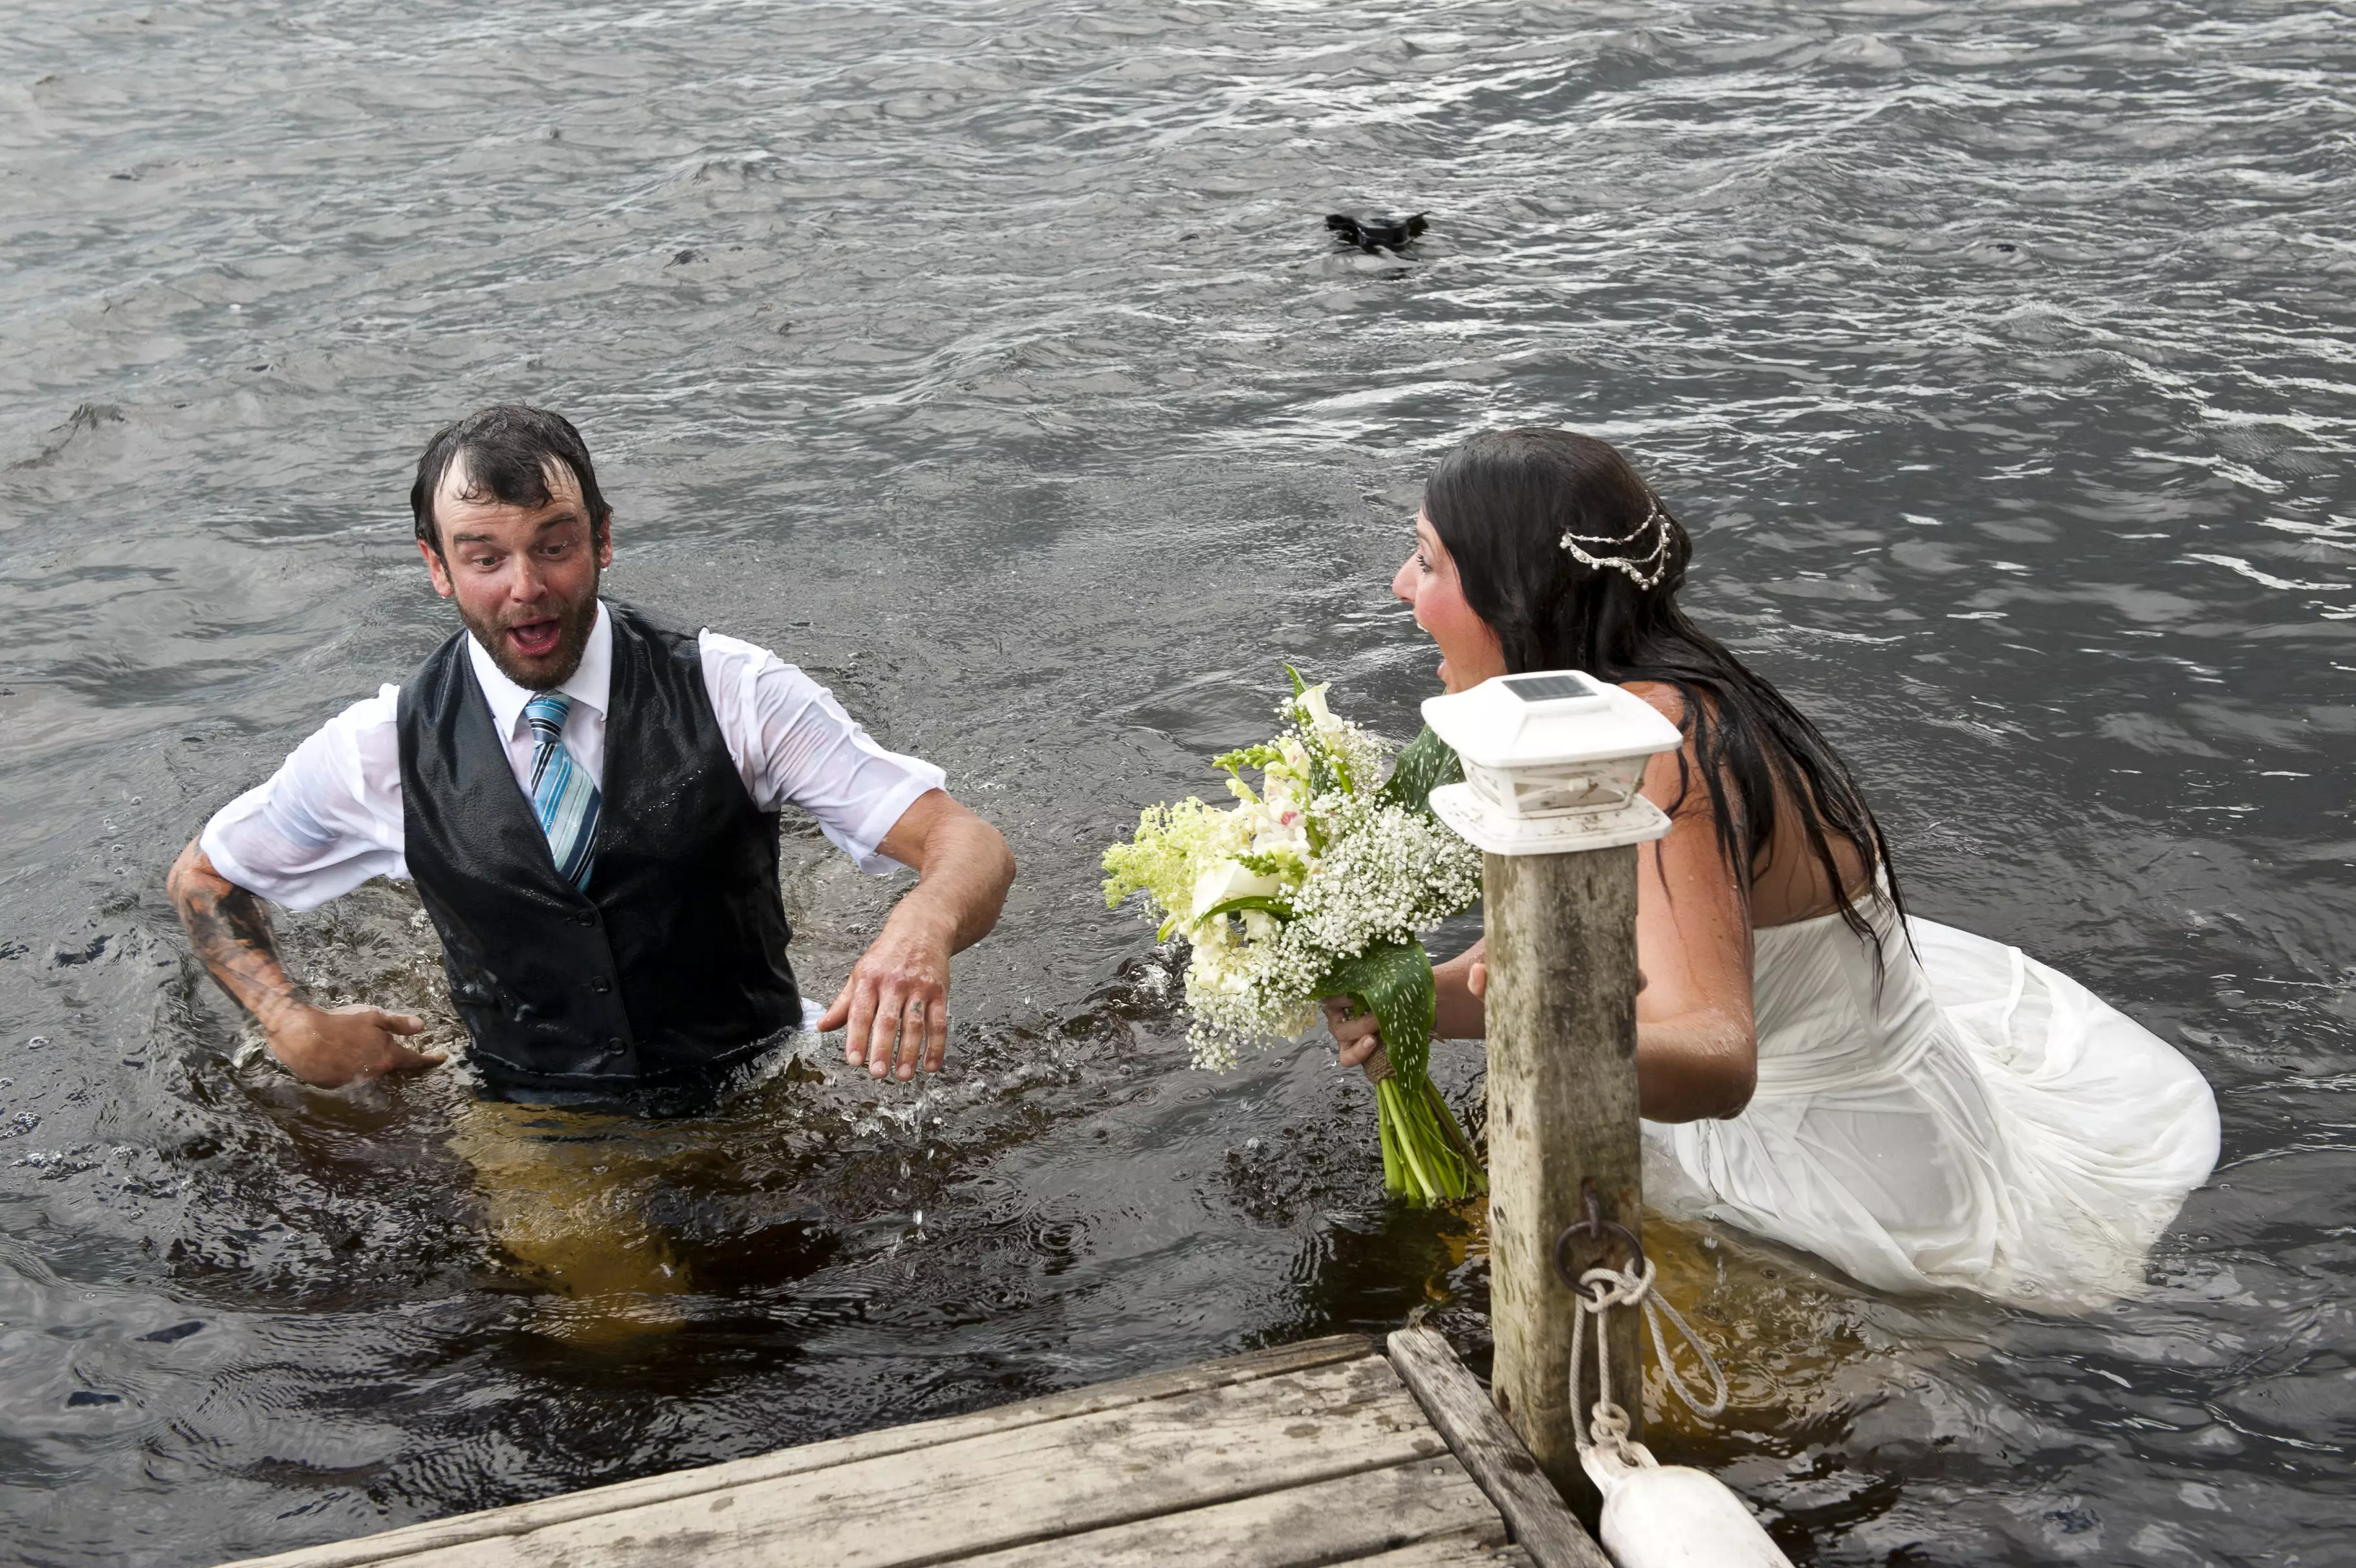 These weren't quite the wedding photographs the couple wanted... (